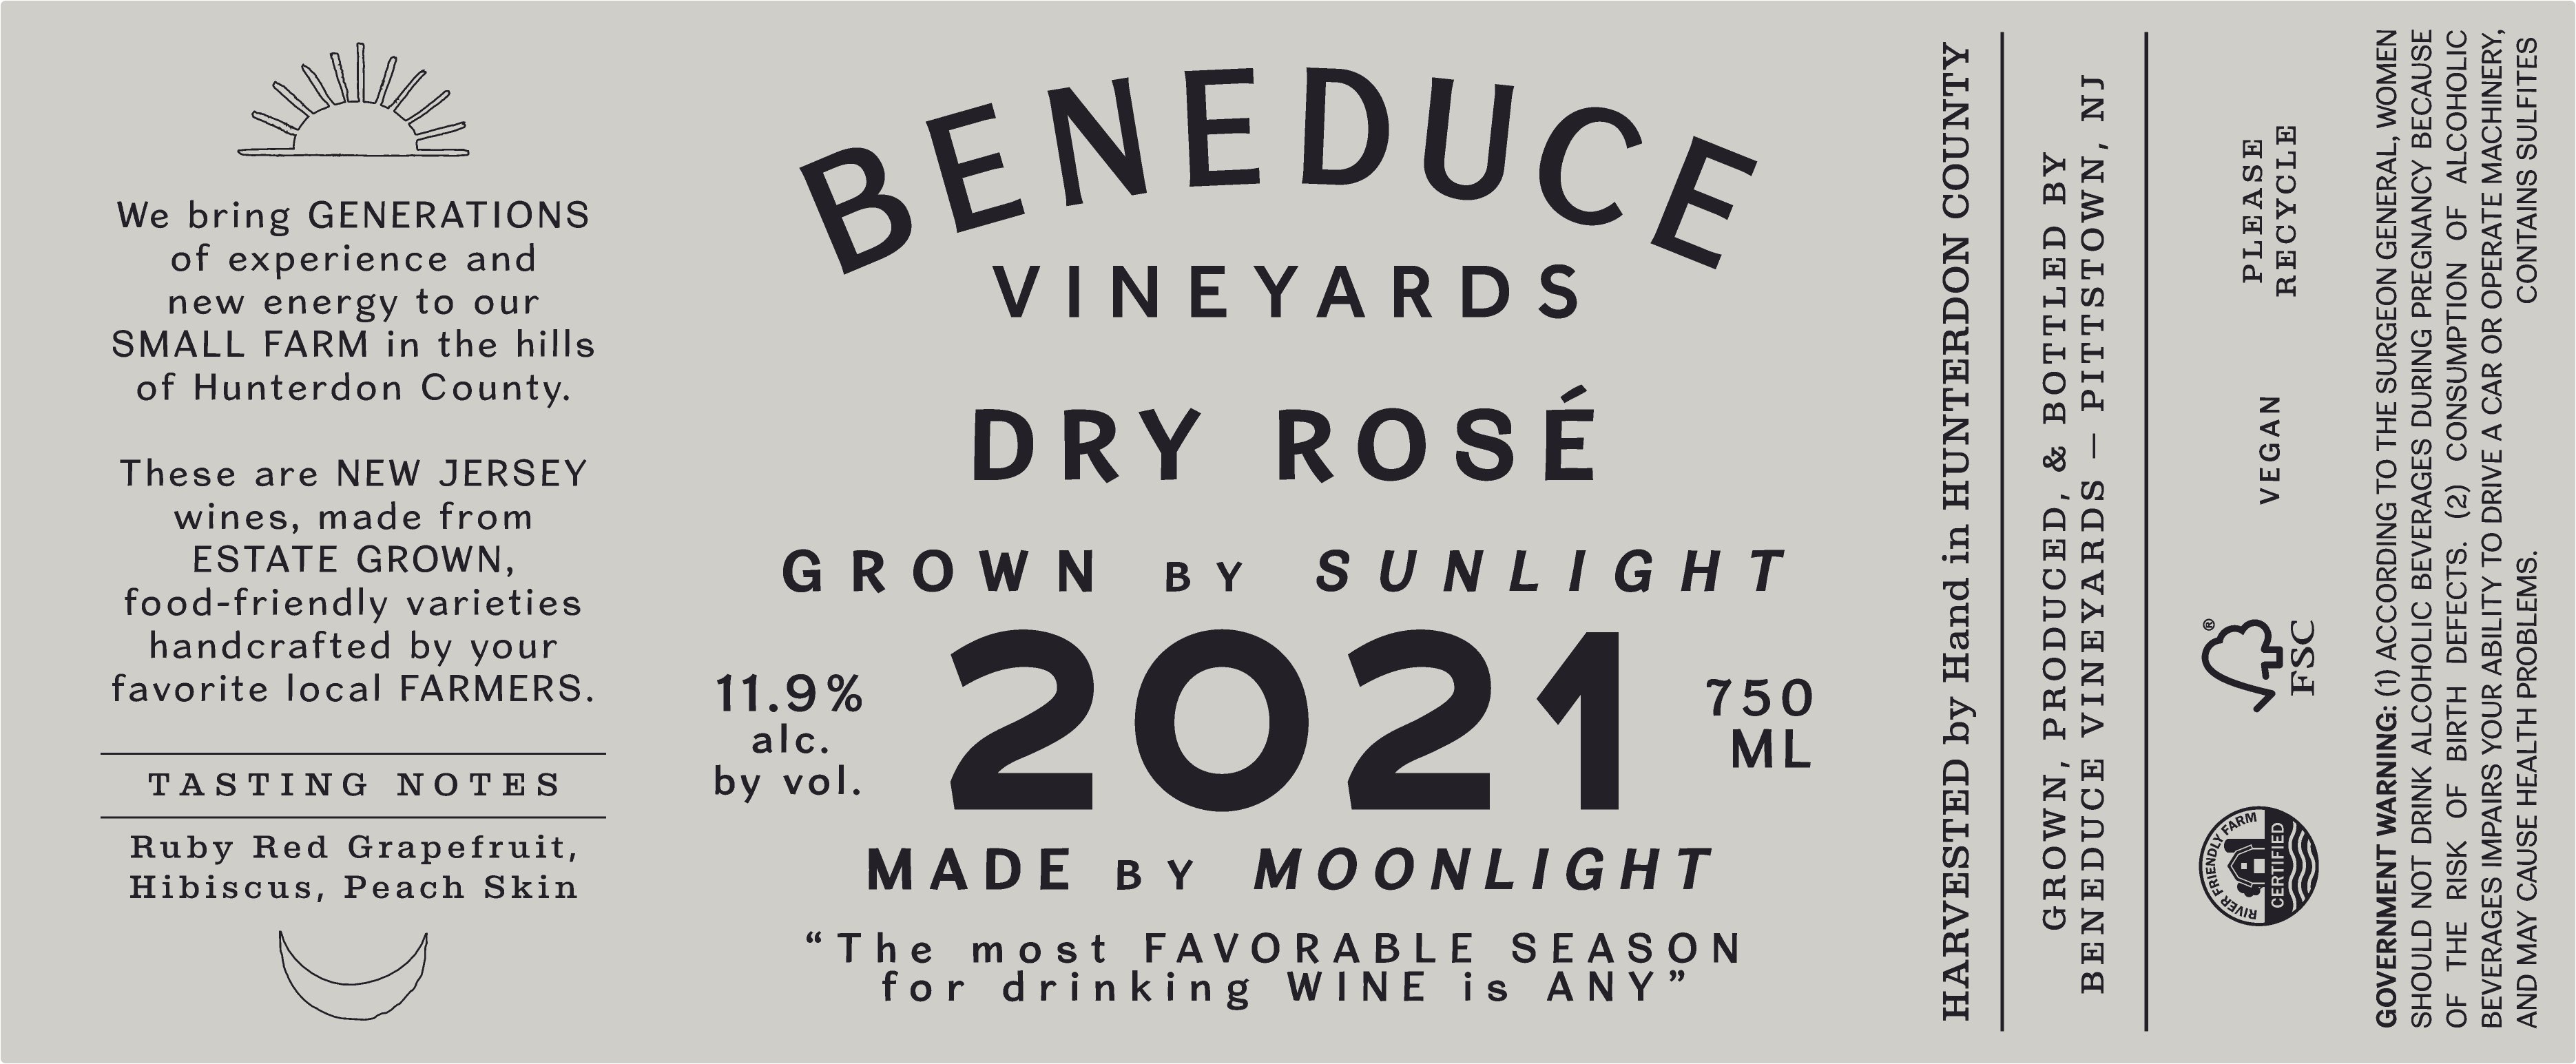 Product Image for 2022 Dry Rosé